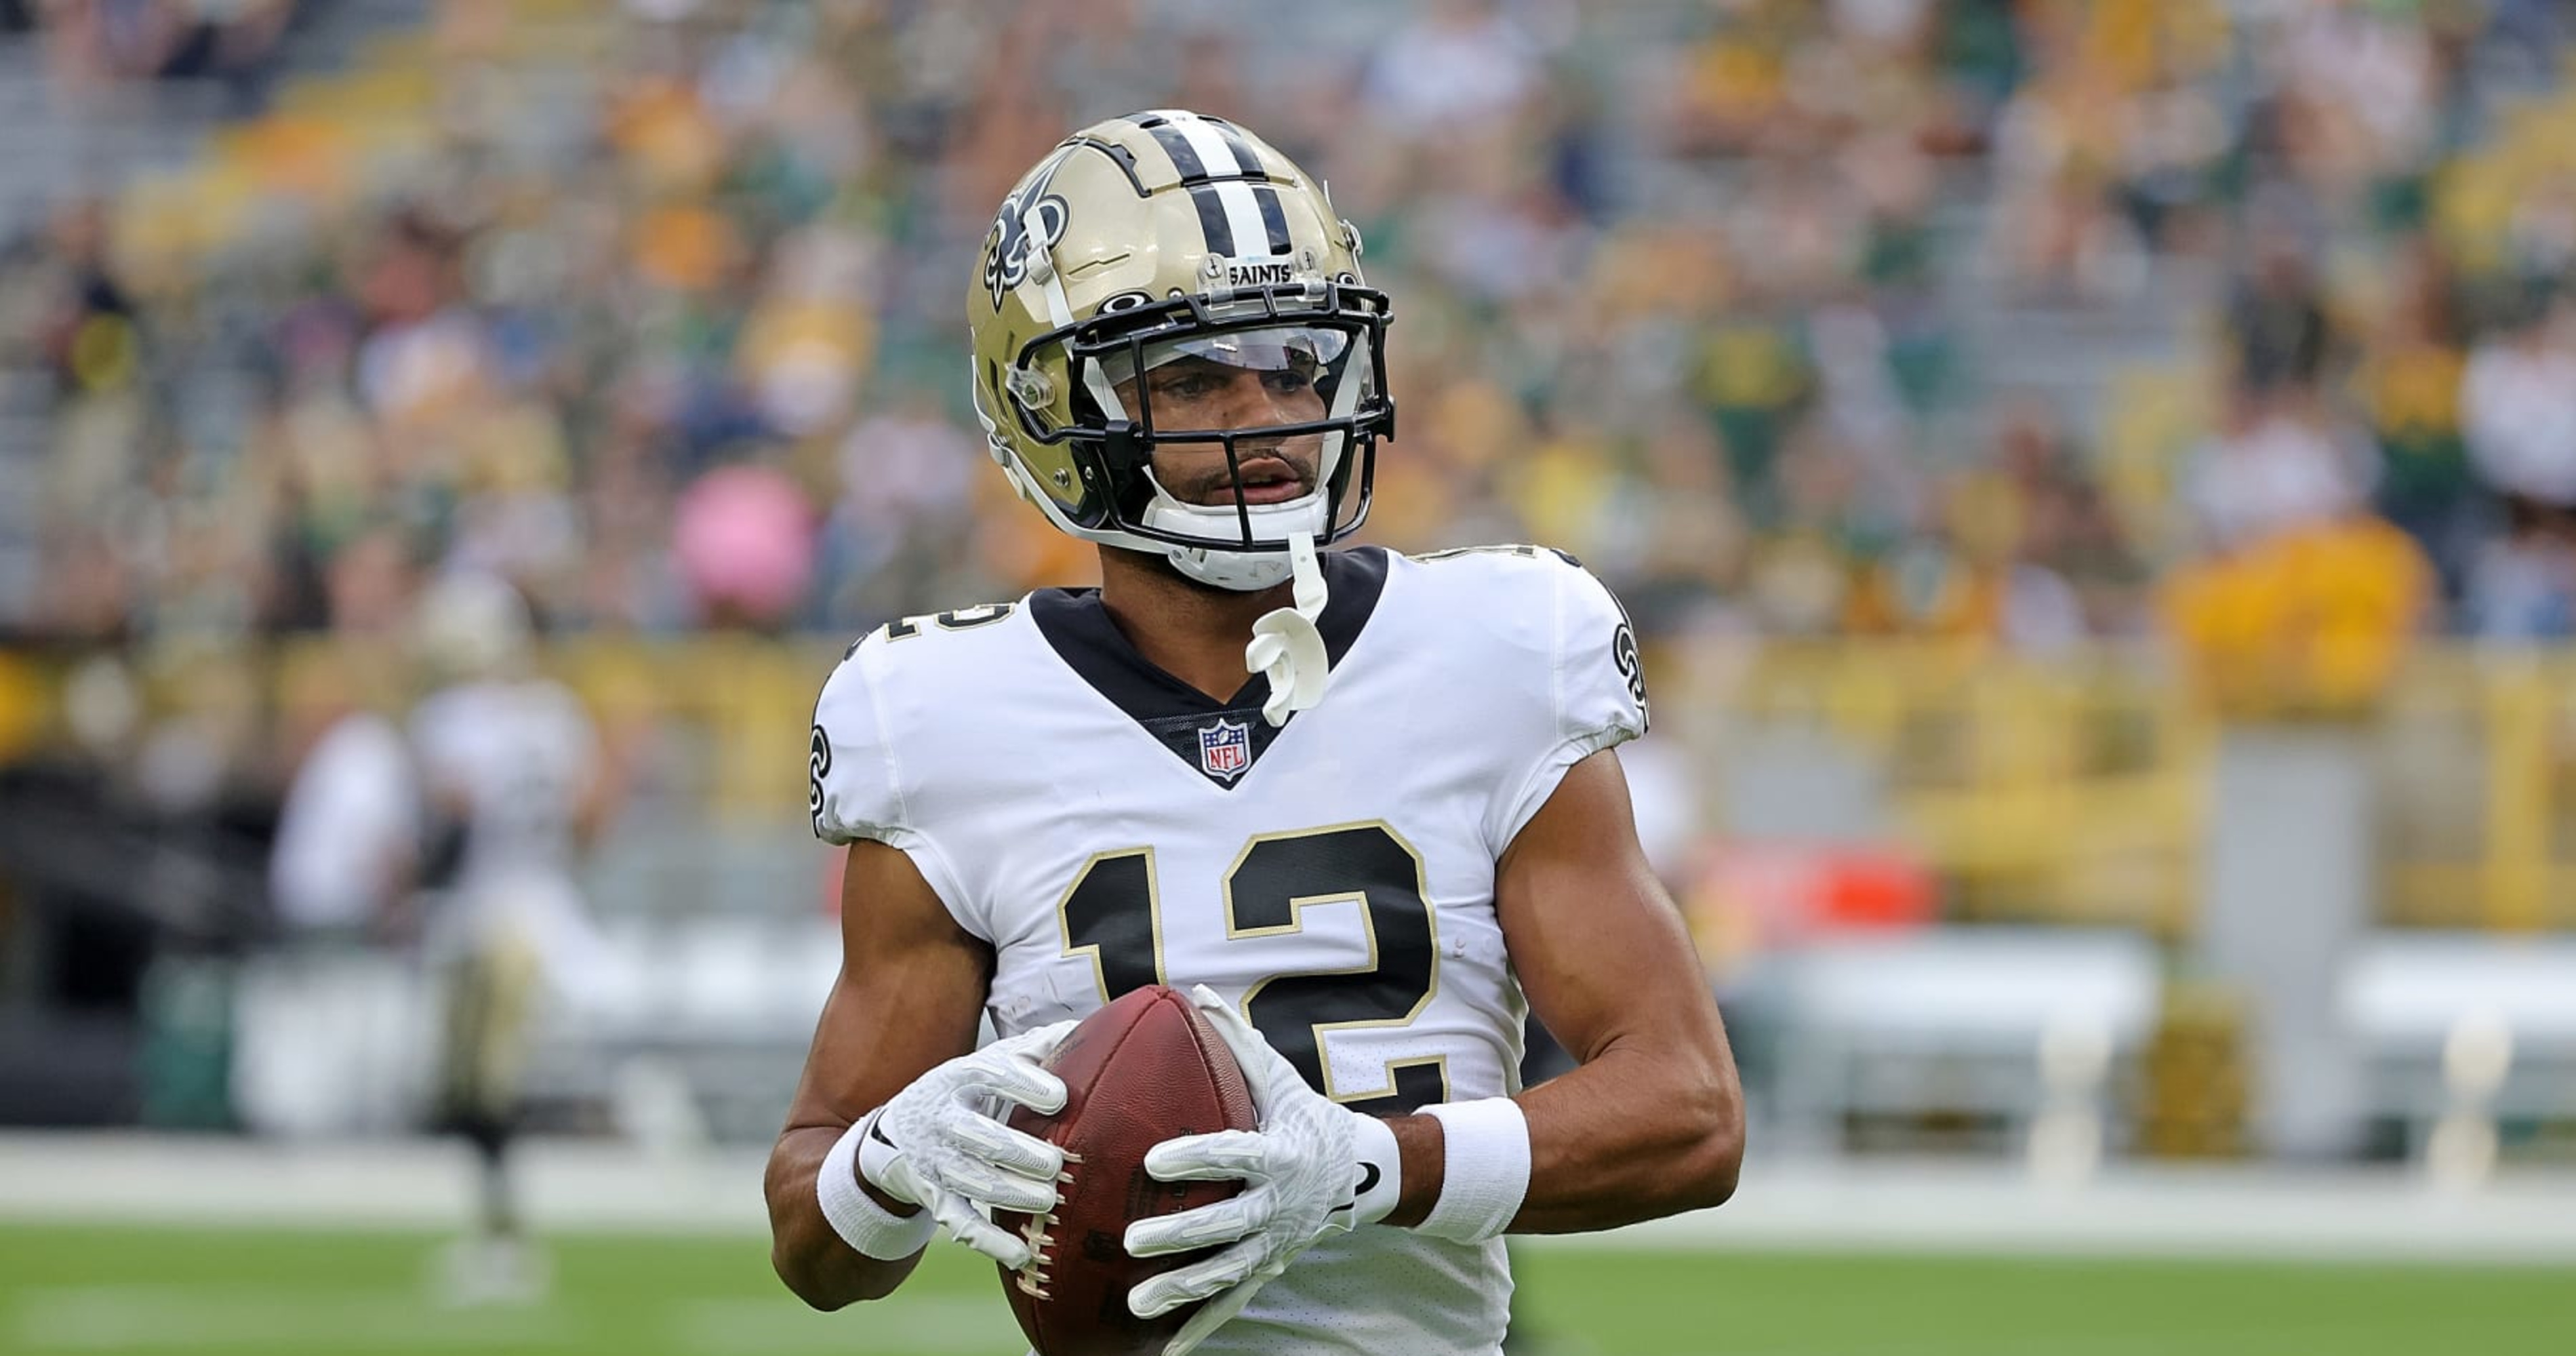 Saints fined more than $550K for player believed to be faking injury